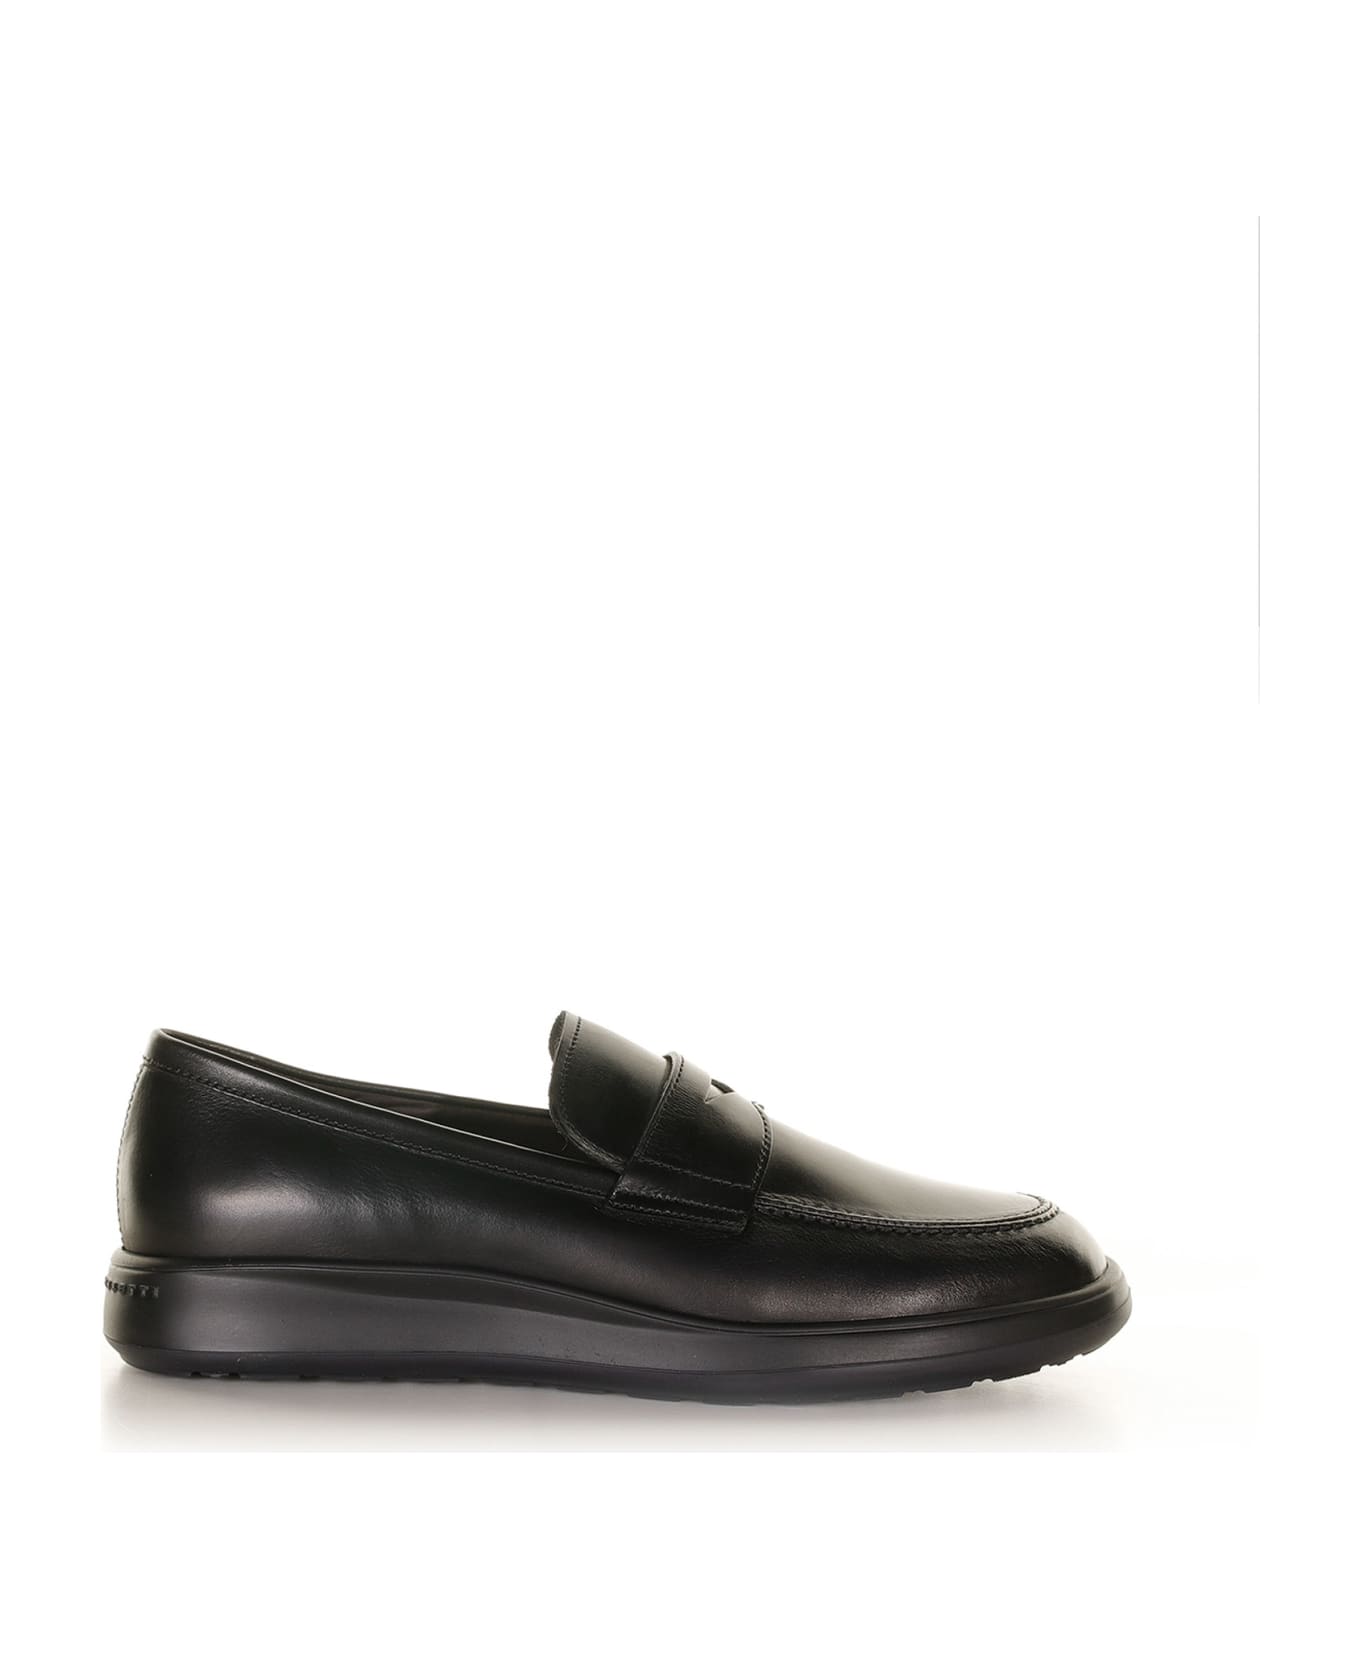 Fratelli Rossetti One Black Leather Loafers - NERO